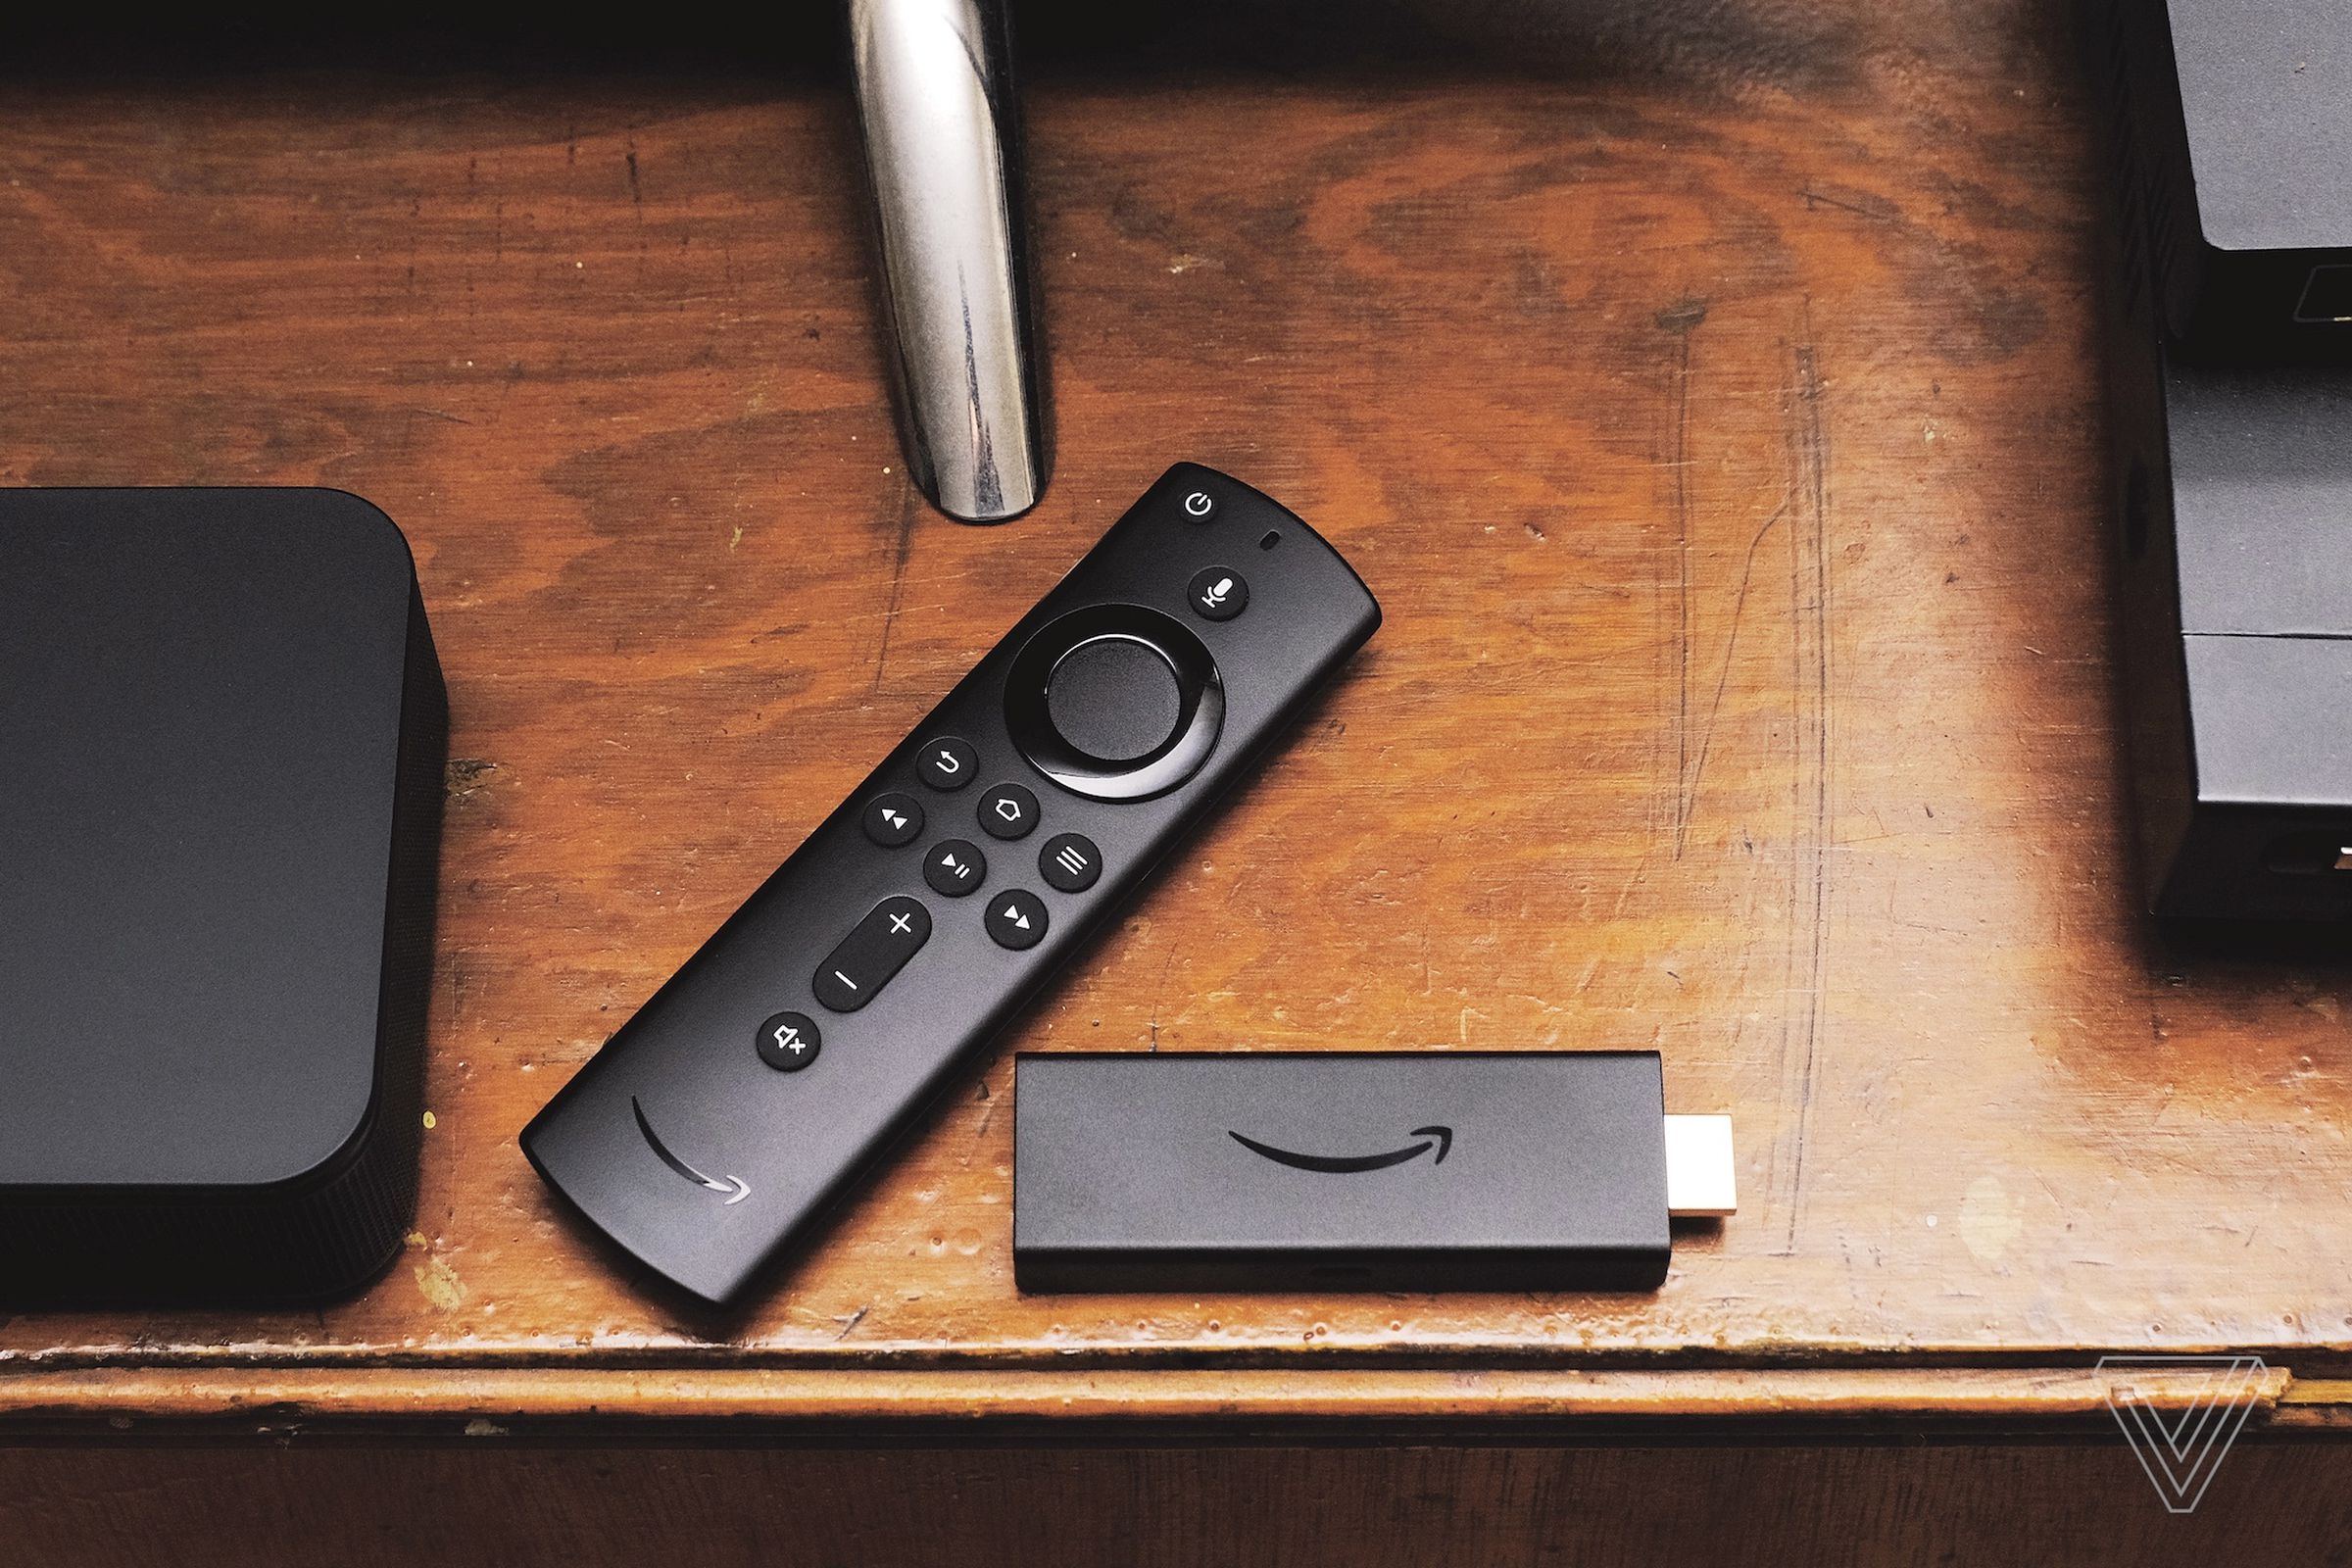 Amazon’s Fire TV Stick is one of the many gadgets you can save on at Target.